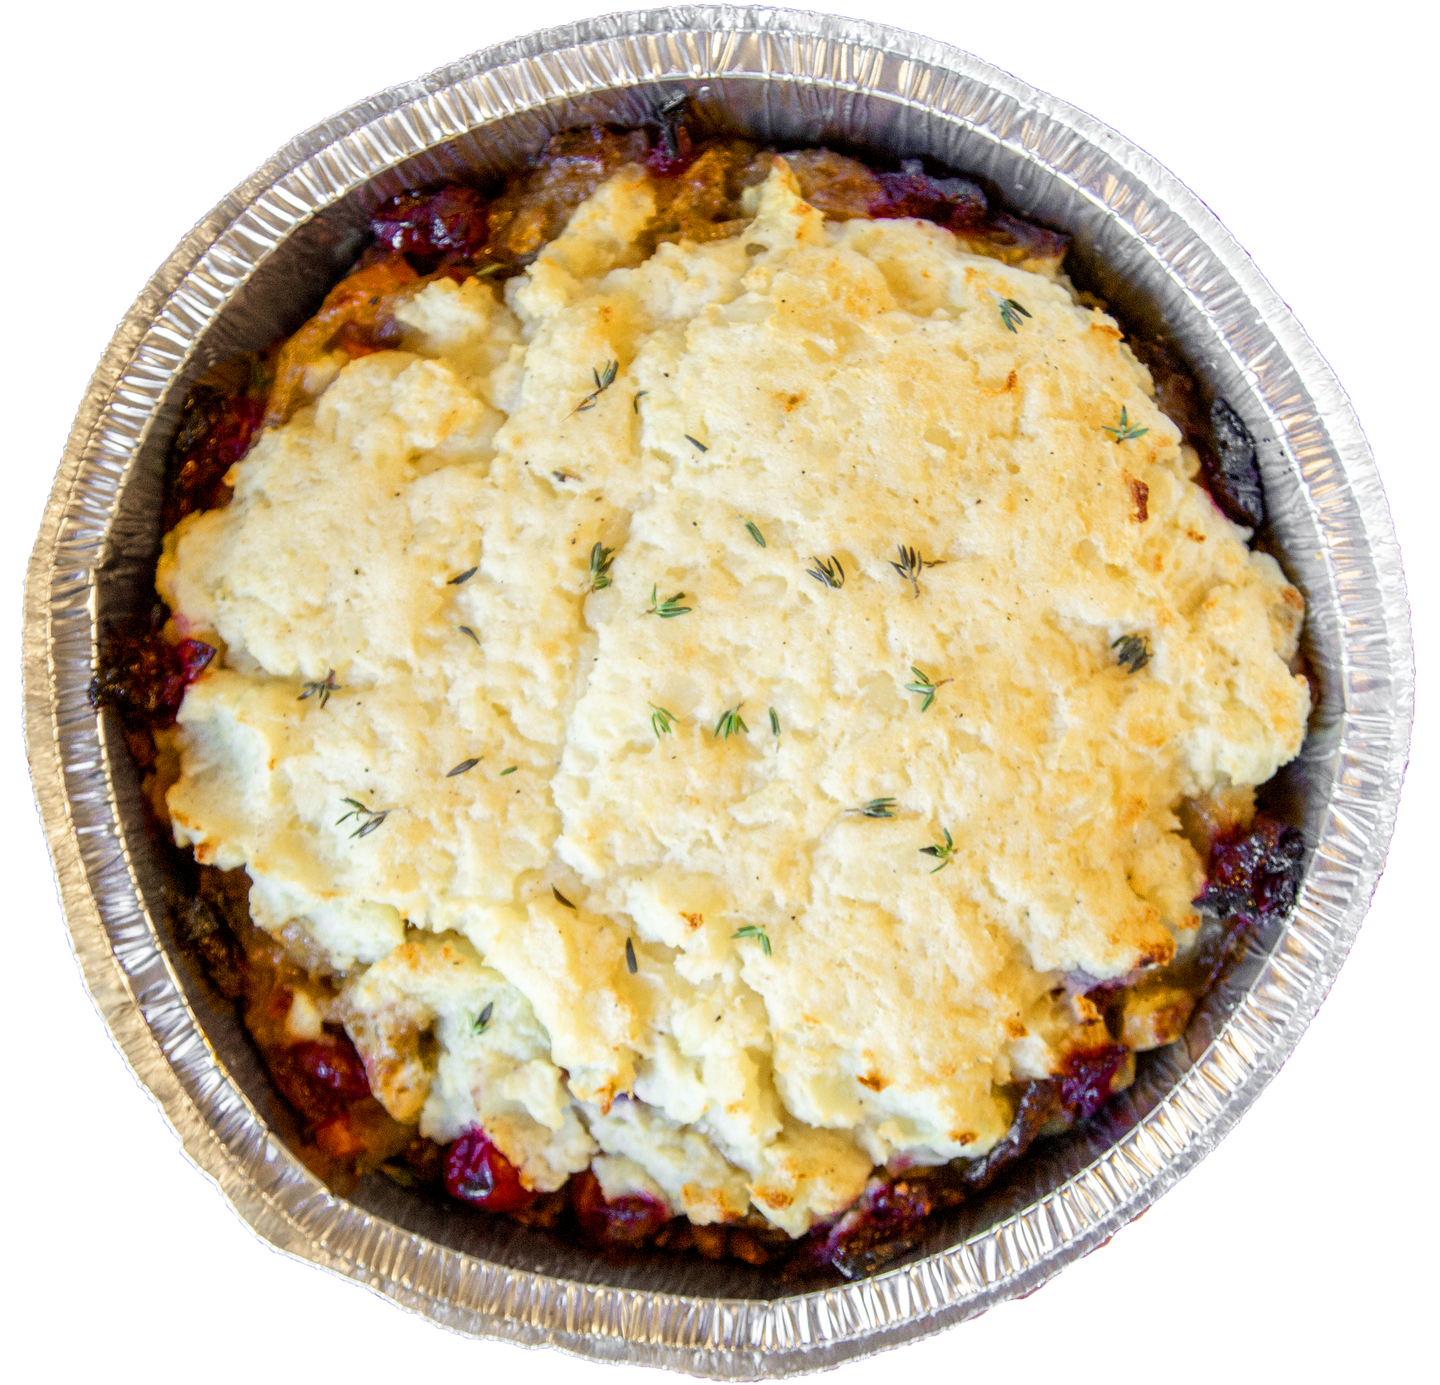 Vegan Shepherd's Pie with cranberries and mashed potatoes in Des Moines, Iowa